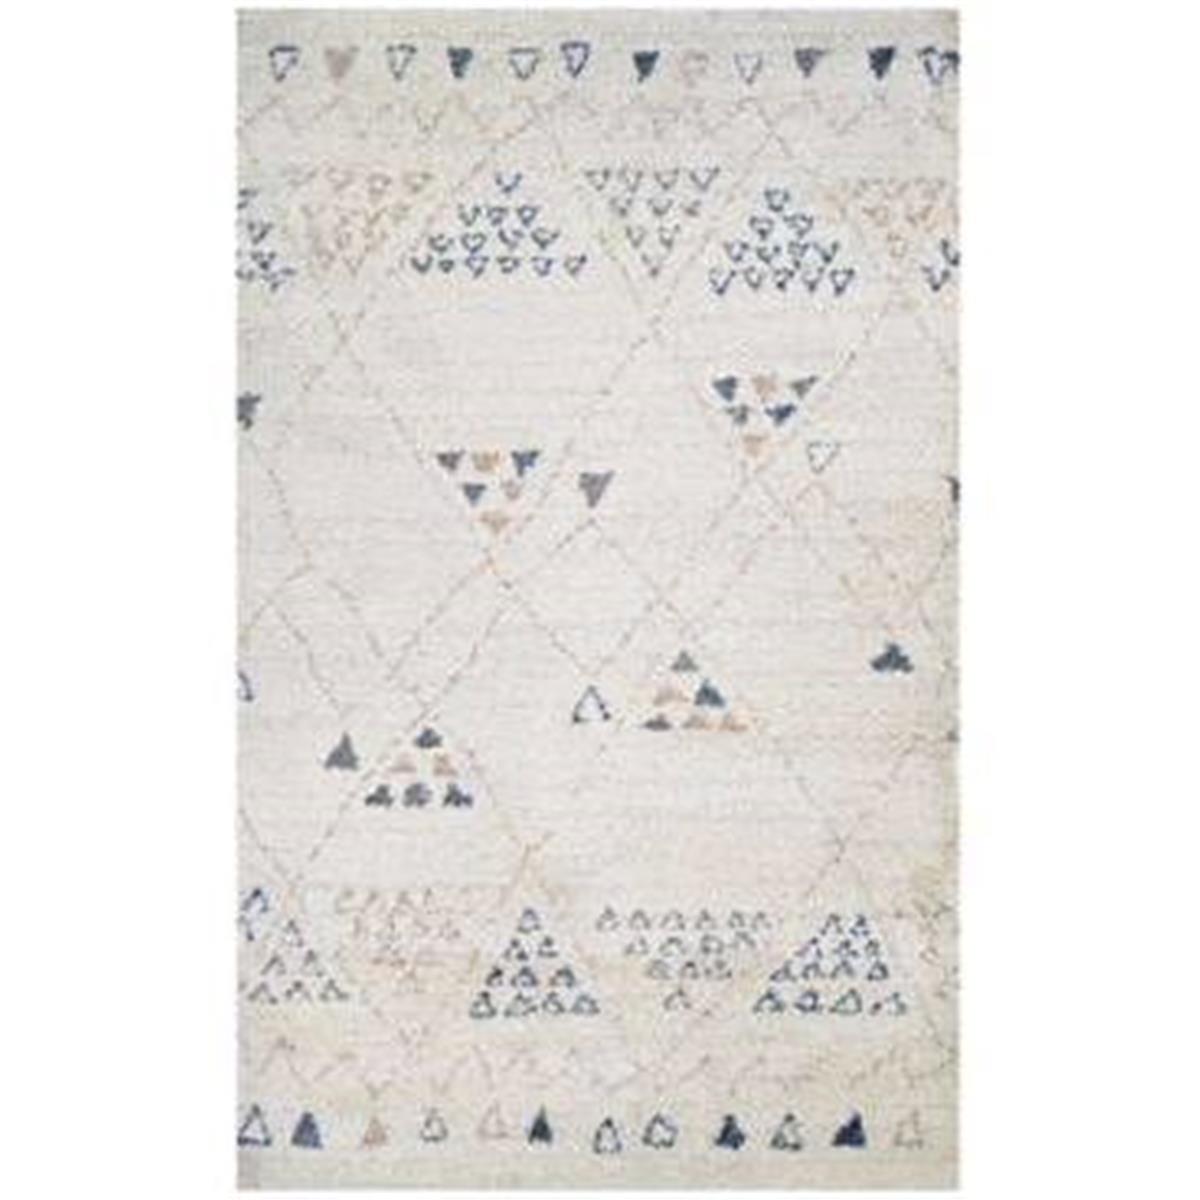 43533159053076t 5 Ft. 3 In. X 7 Ft. 6 In. Bromley Jakarta Rug, Ivory & Caramelblk